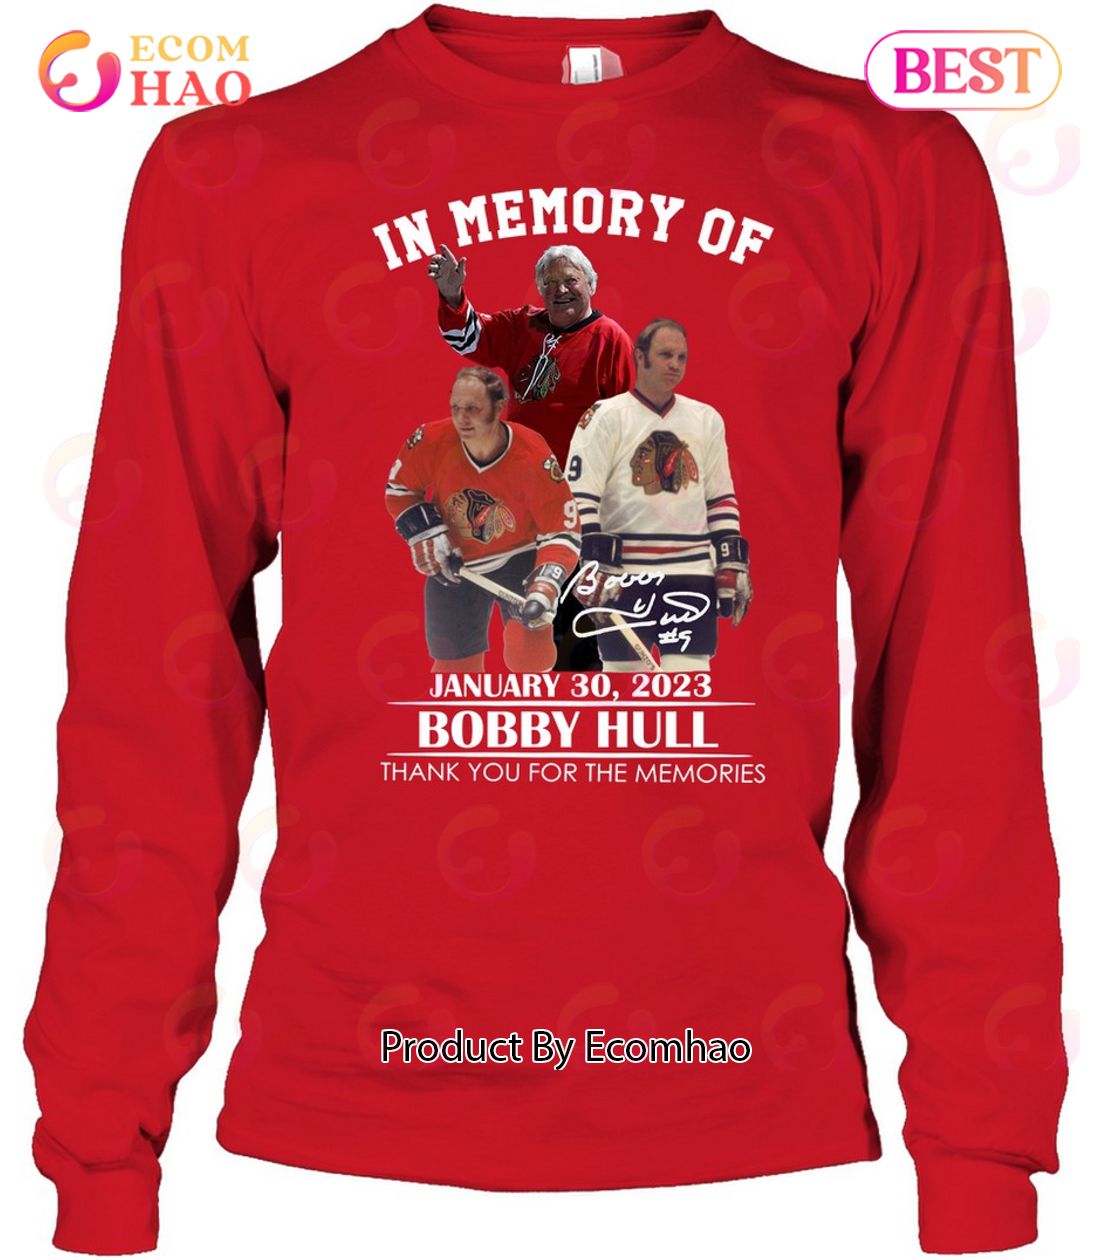 In Memory Of January 30, 2023 Bobby Hull Thank You For The Memories T-Shirt